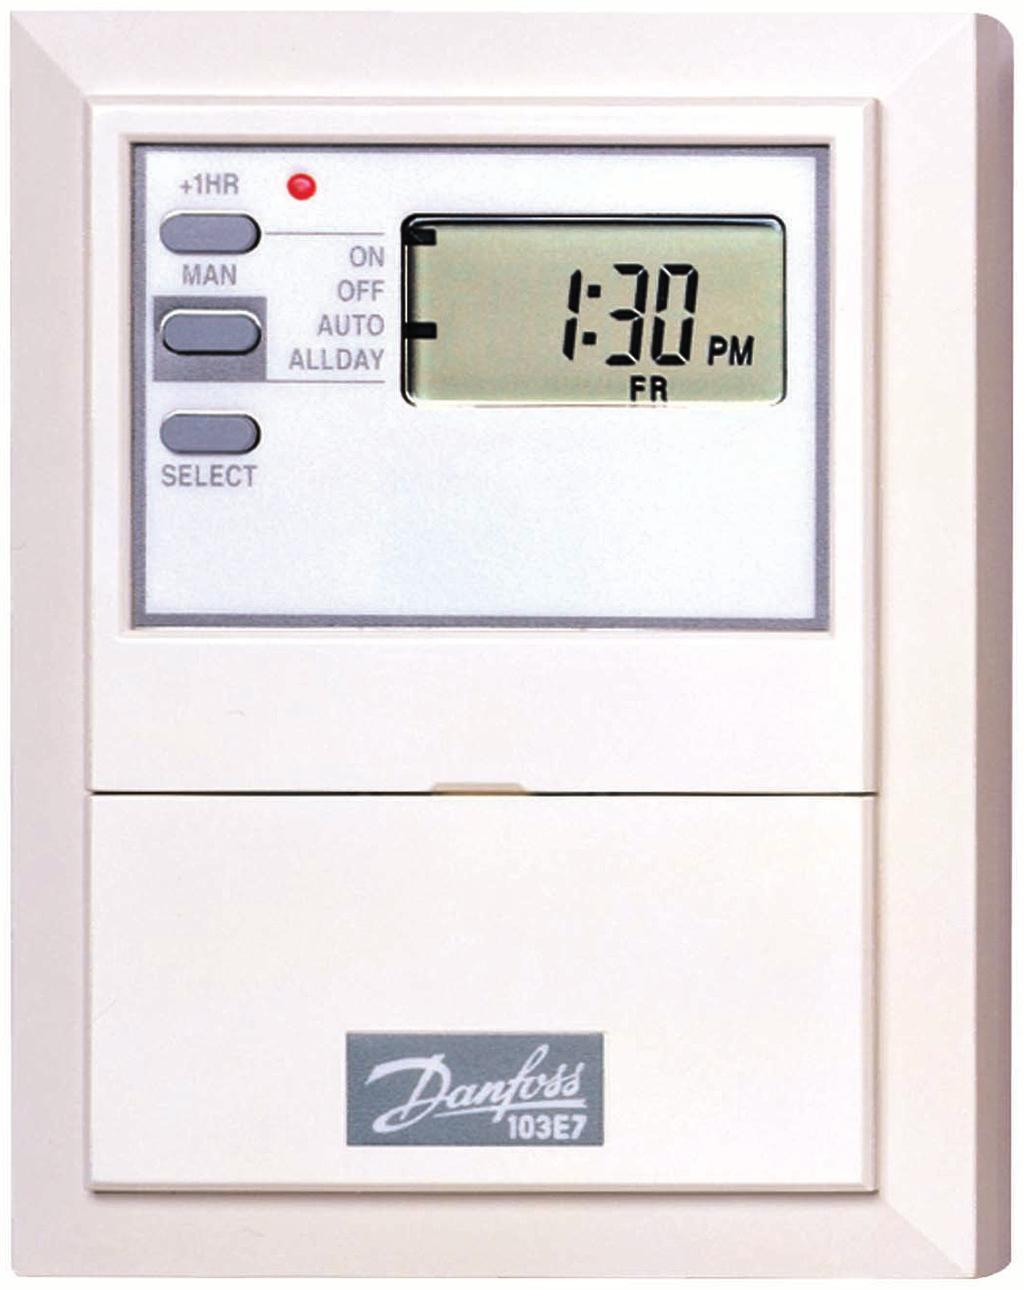 103E7 7Day Electronic Timeswitch for Controlling Hot Water and Heating For a large print version of these instructions please call Marketing on 01234 364 621.